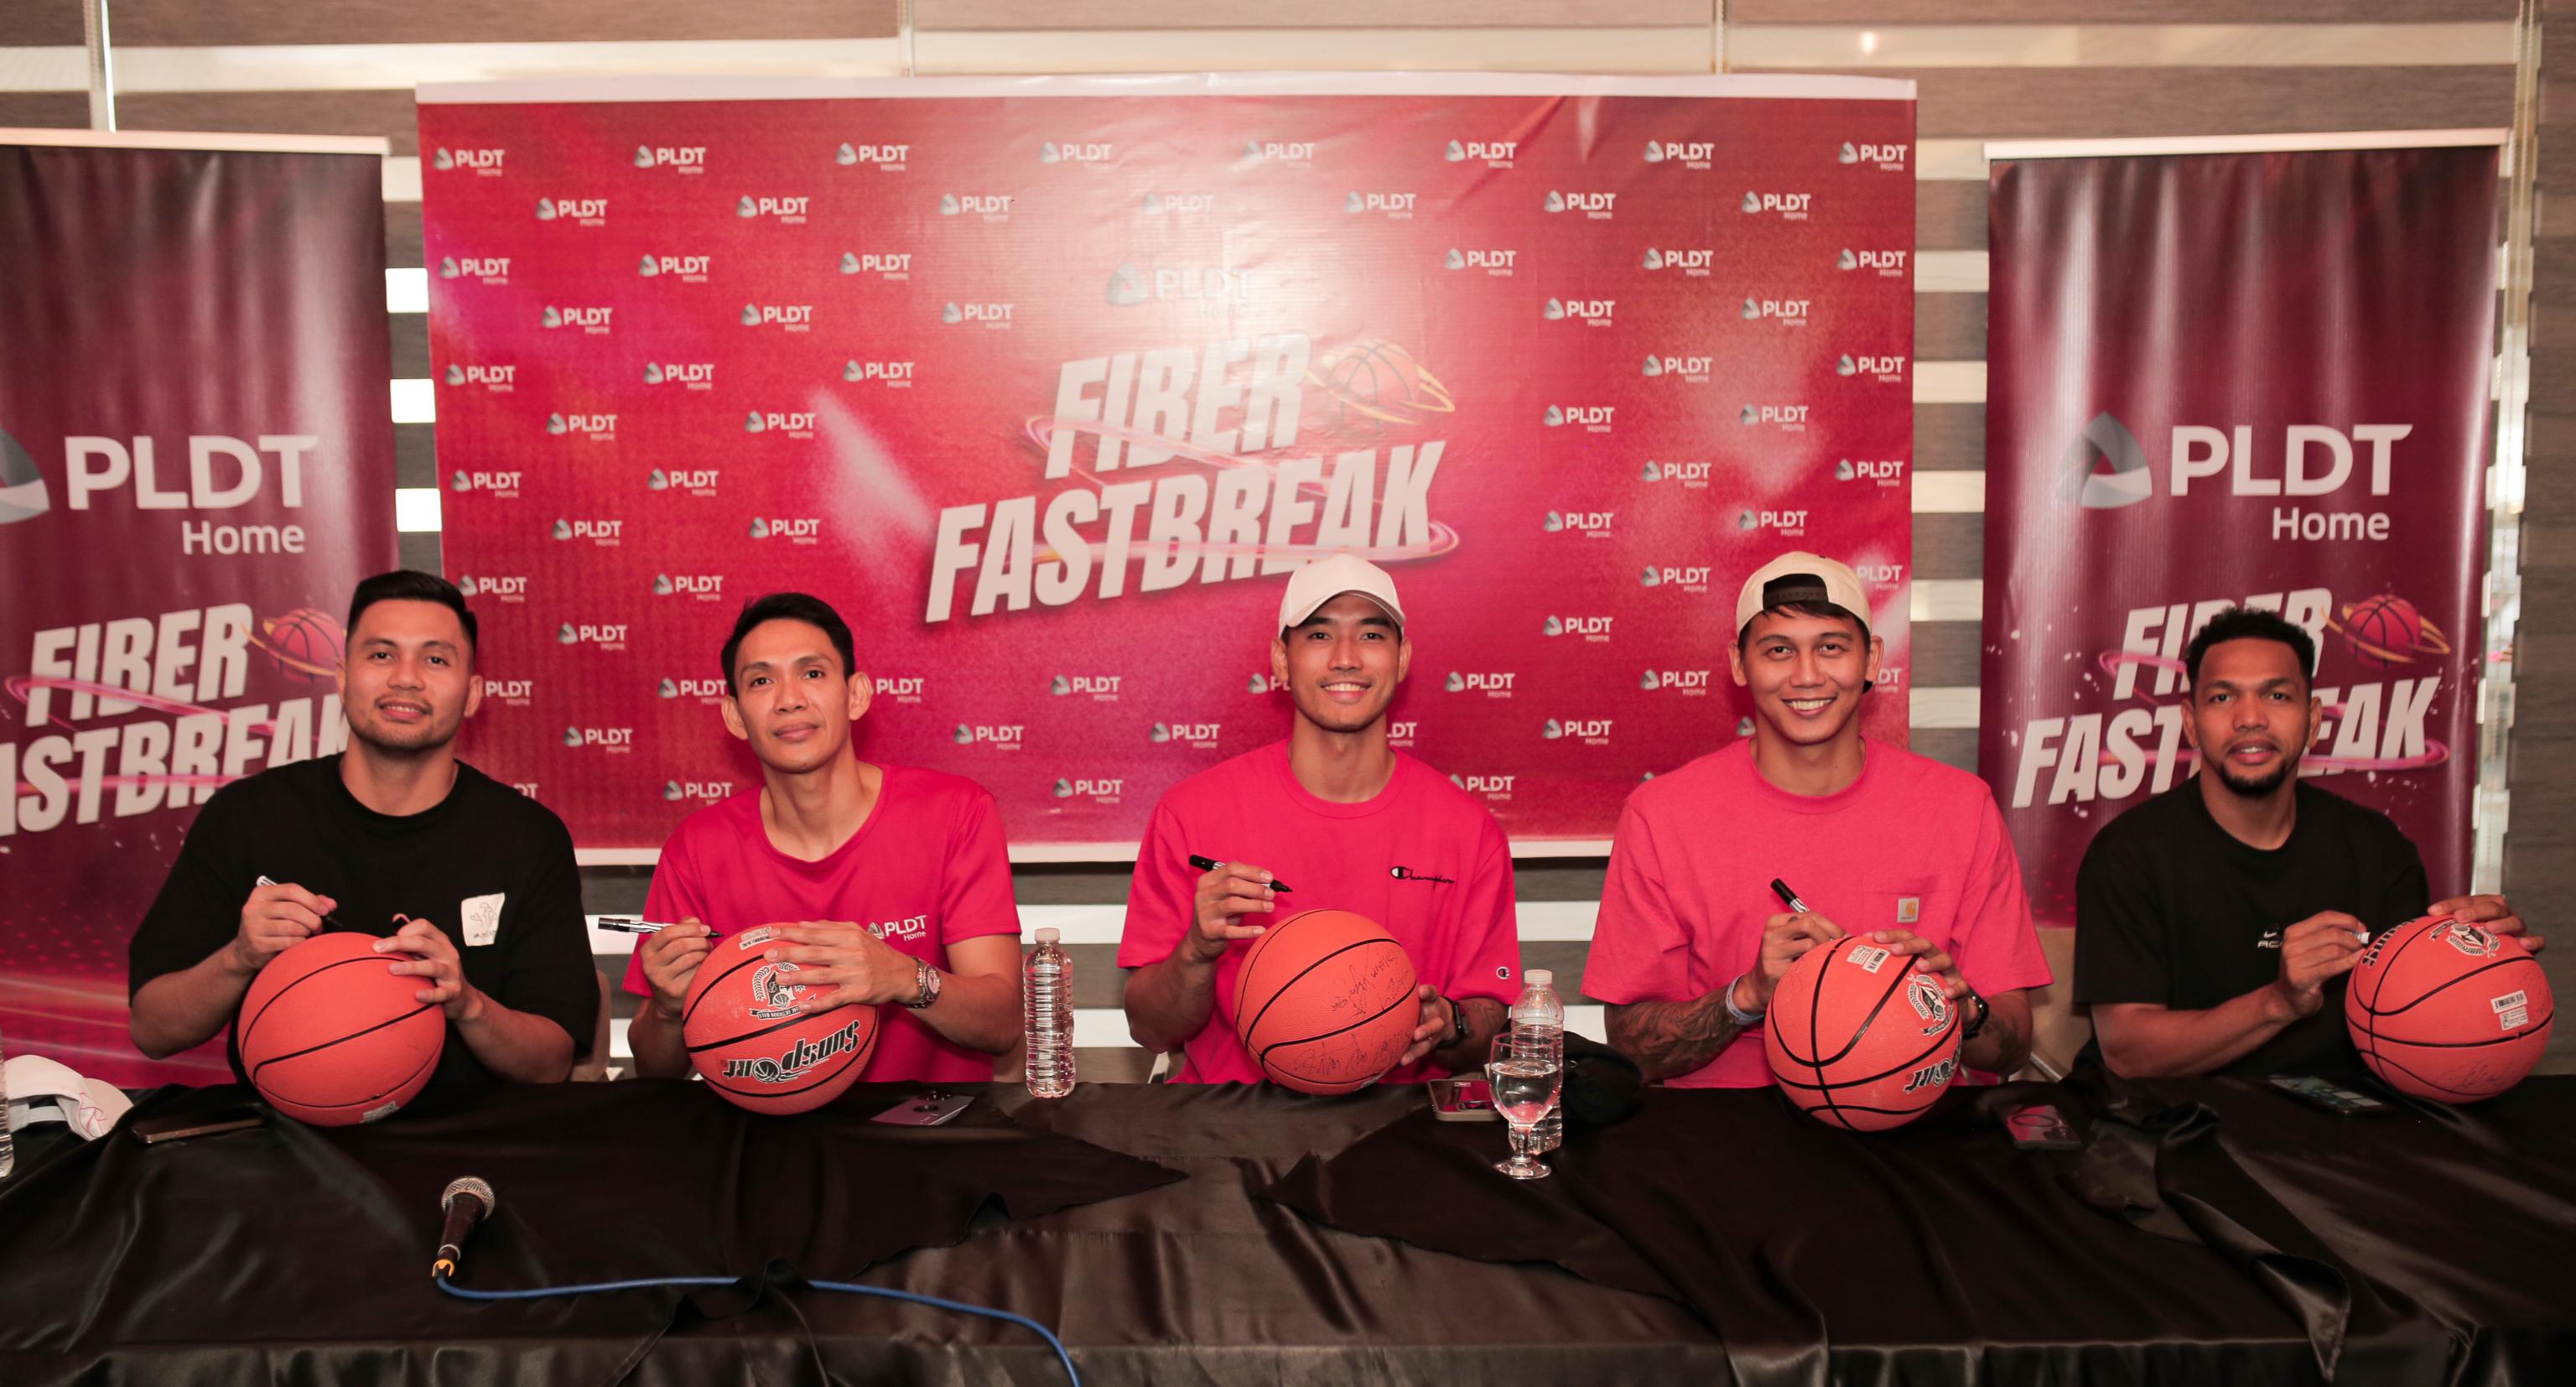 The PLDT Fiber Fastbreak star players sign basketballs to be gifted to lucky PLDT Home customers.